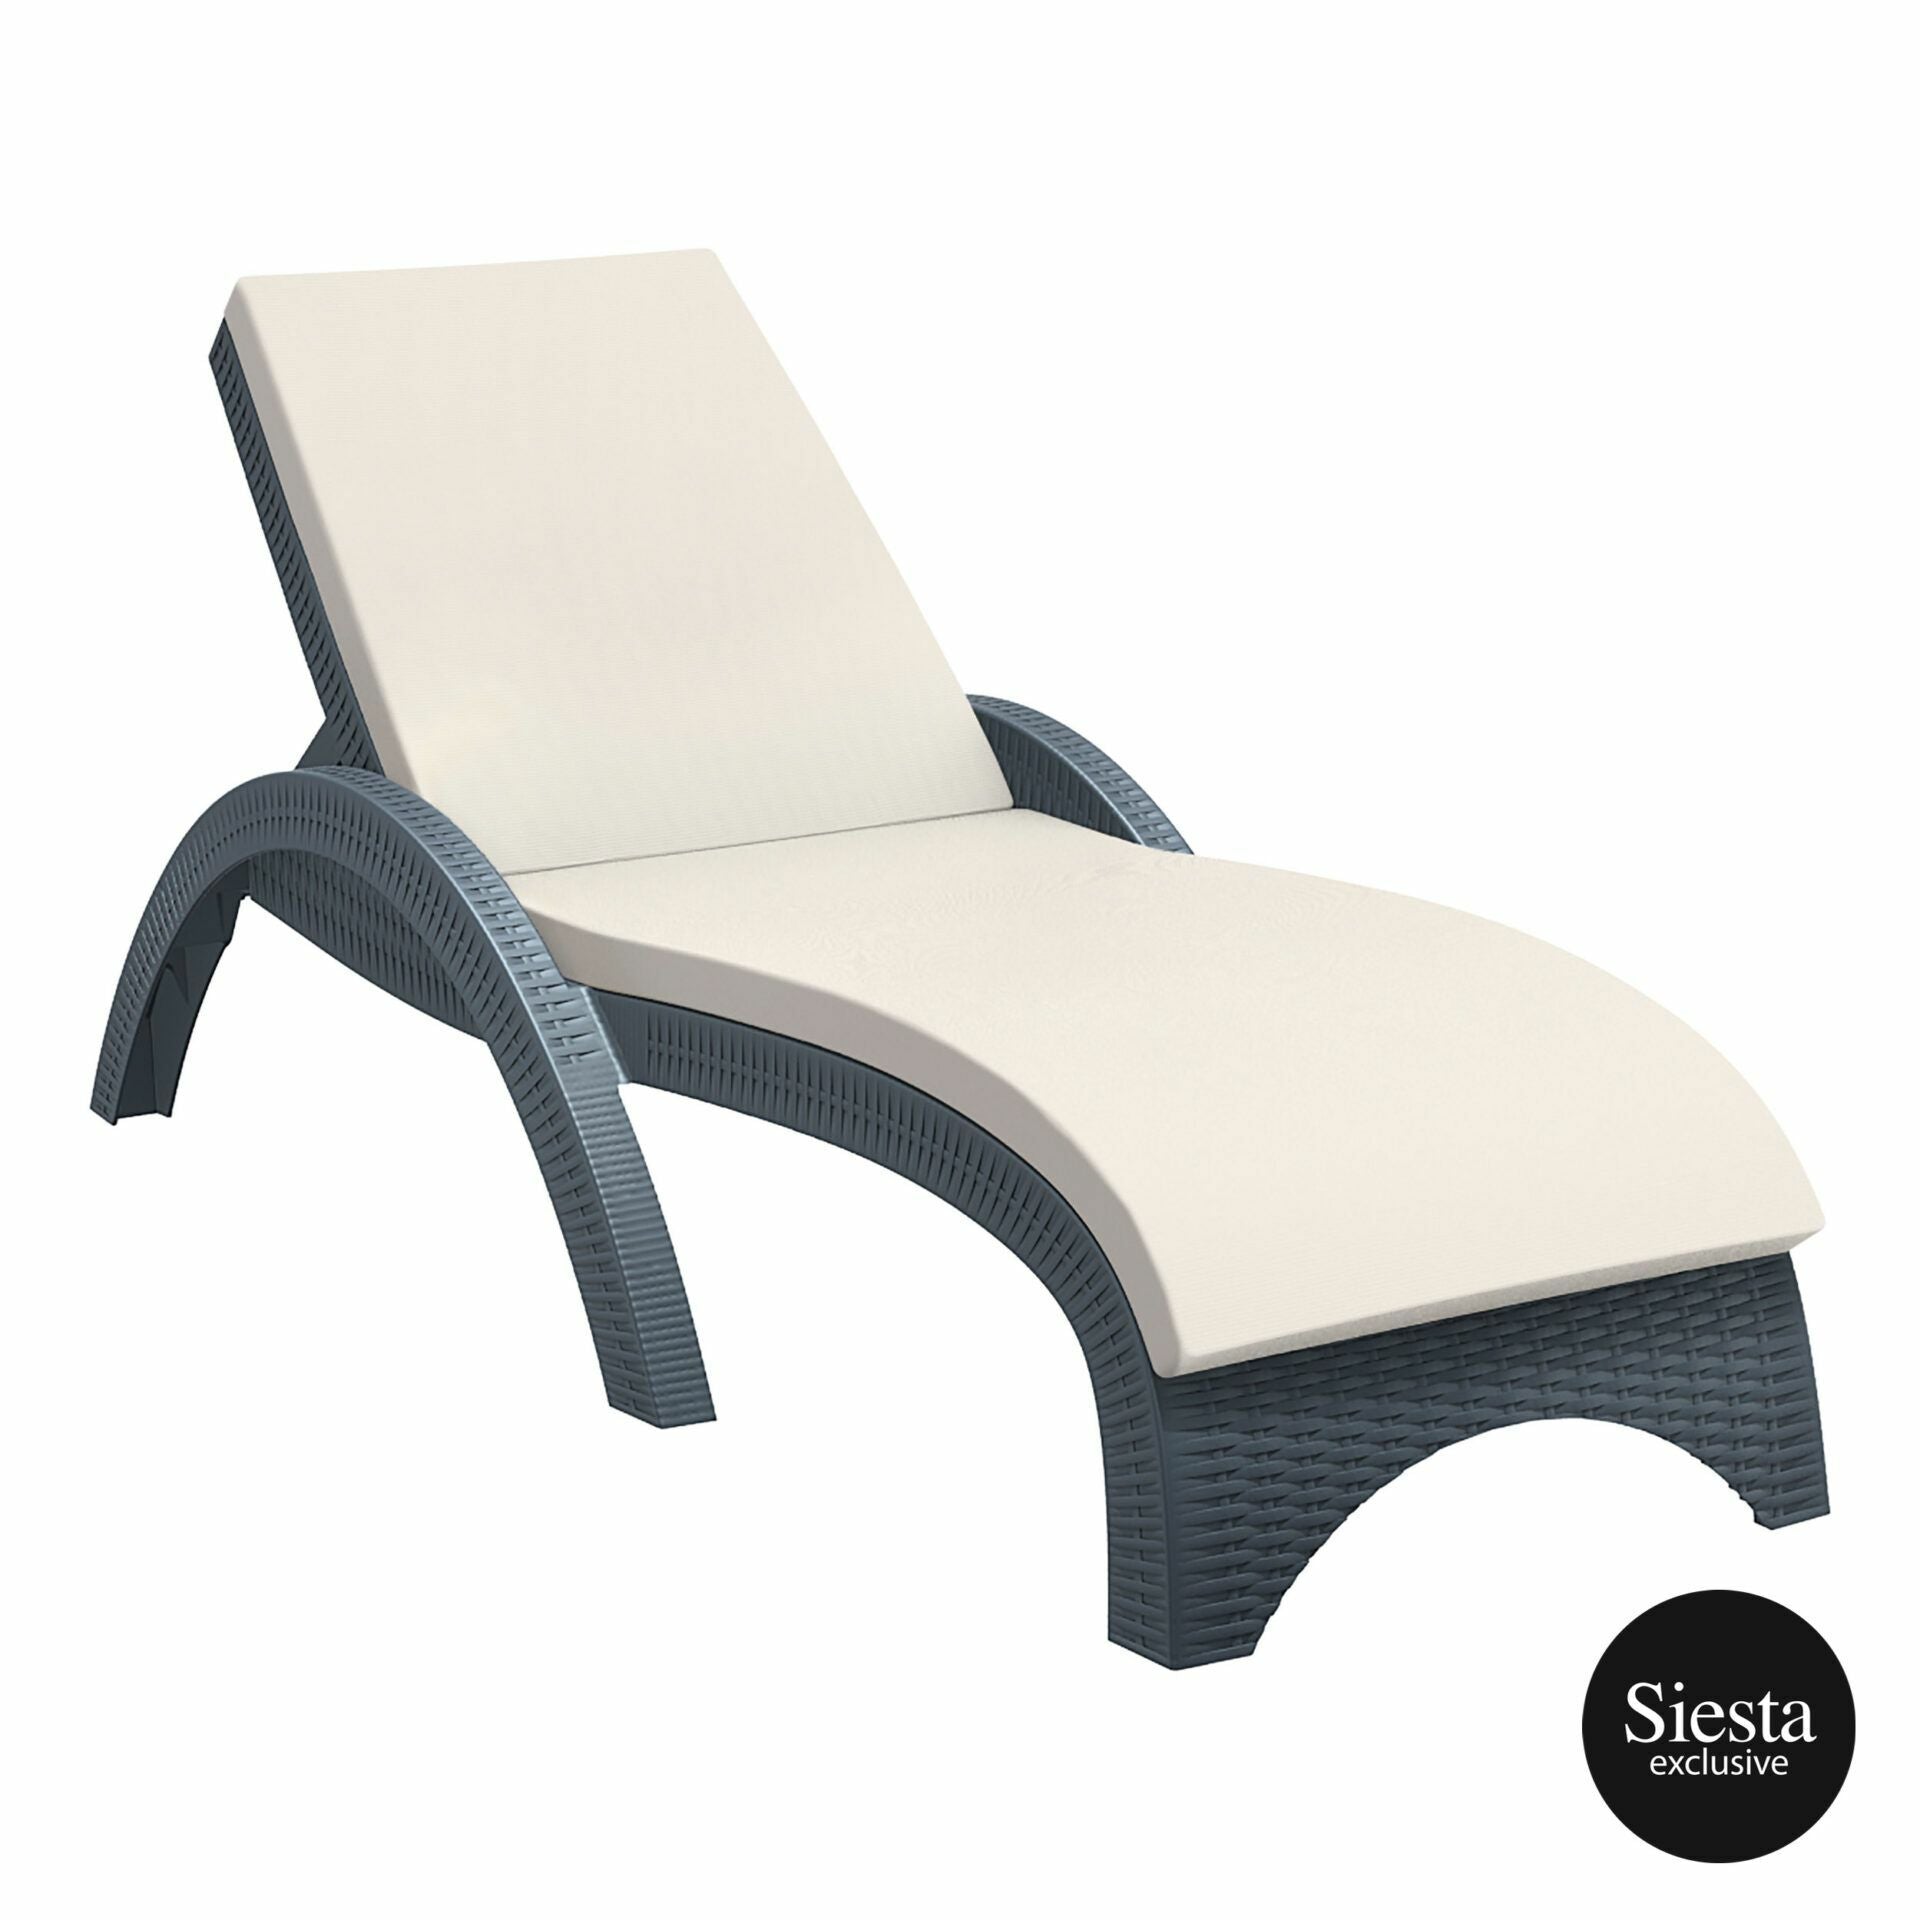 Fiji Sunlounge - Anthracite with Beige Cushion